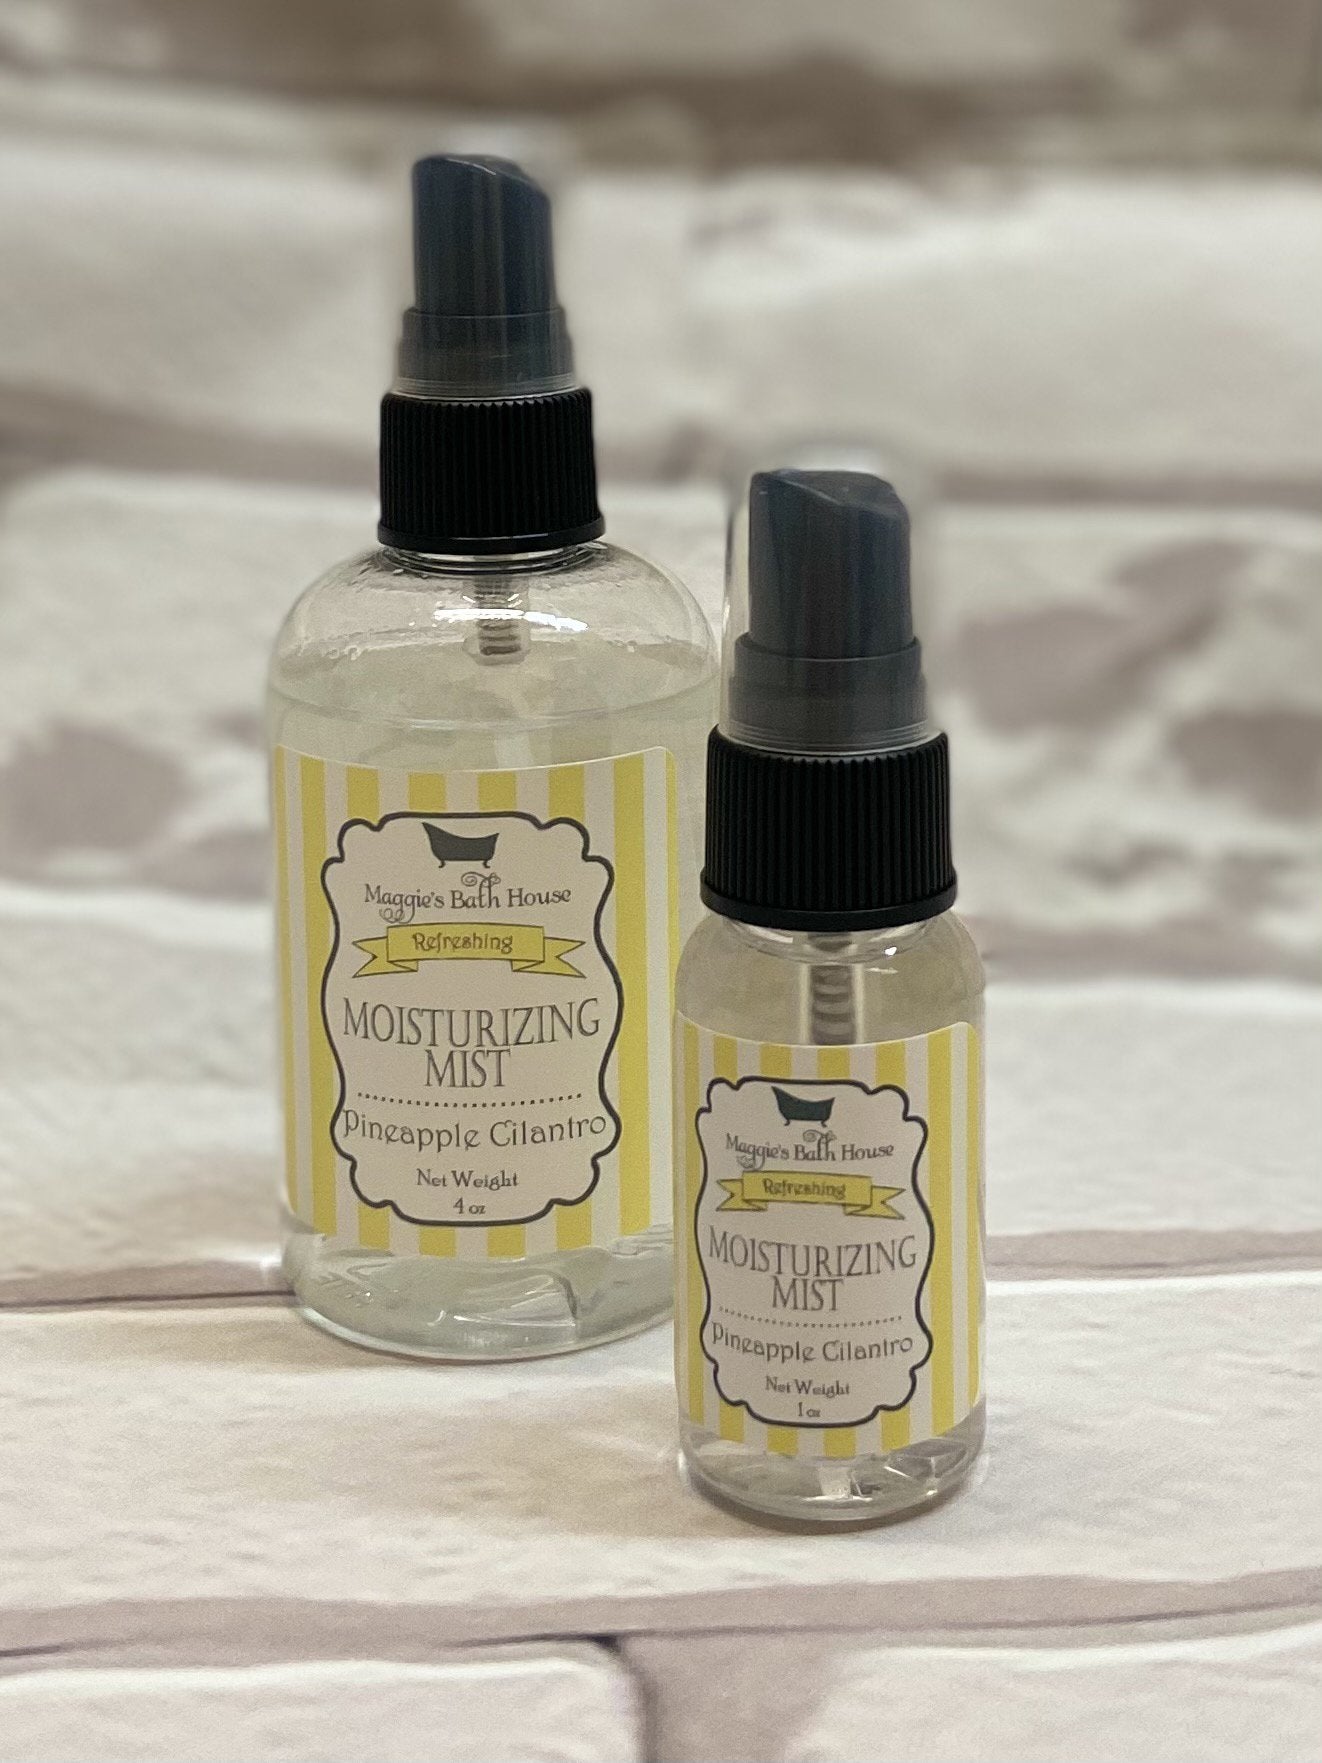 Moisturizing Mists - Made in the USA